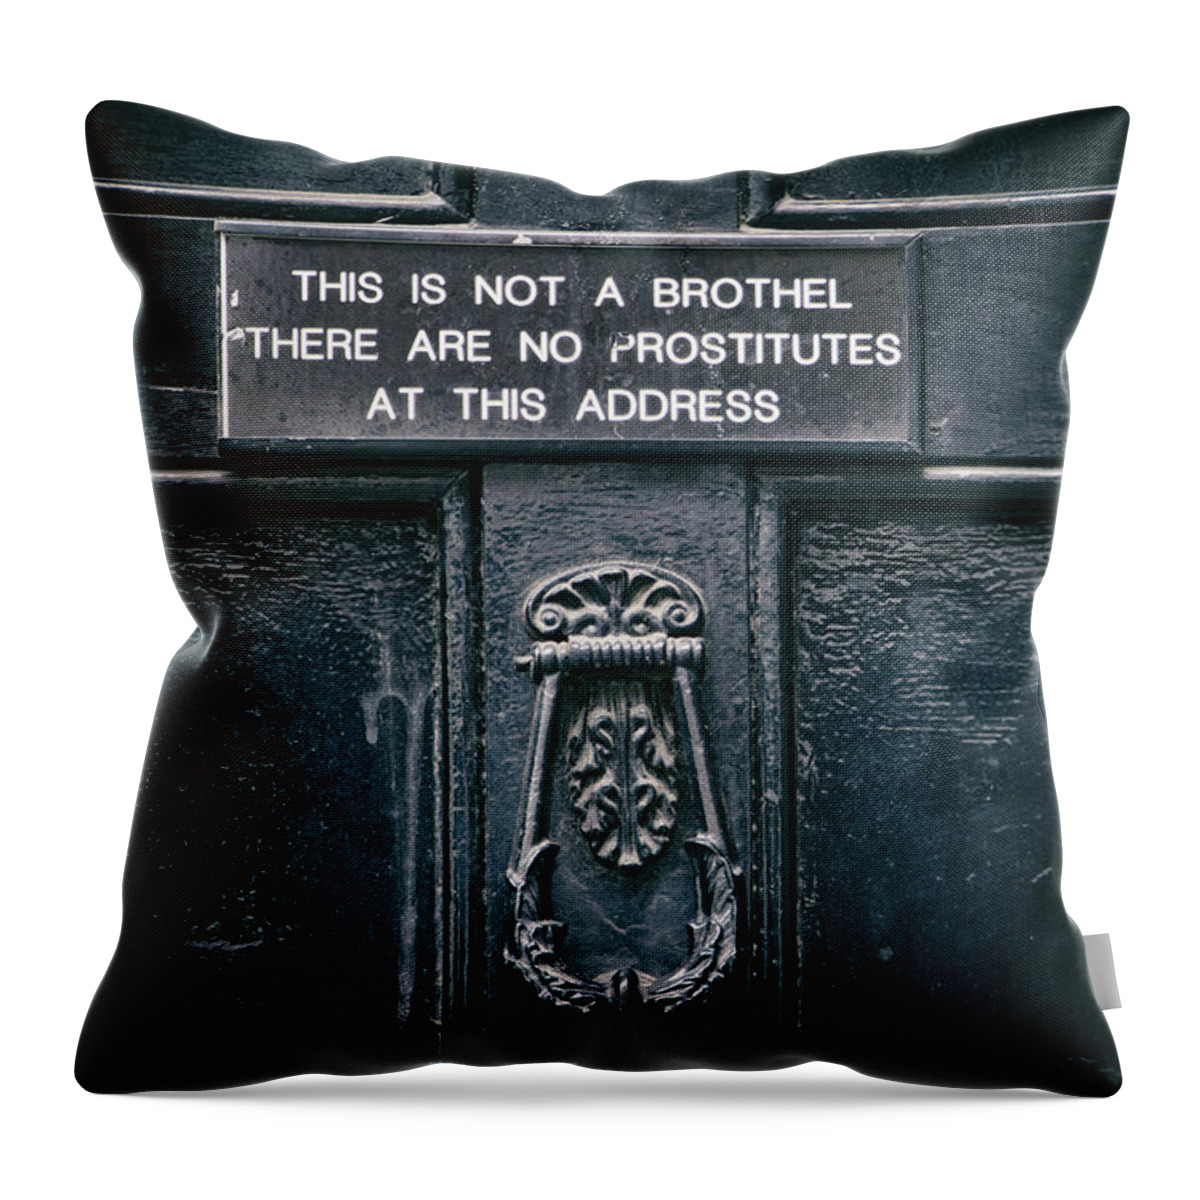 London Throw Pillow featuring the photograph This Is Not A Brothel by Iryna Goodall